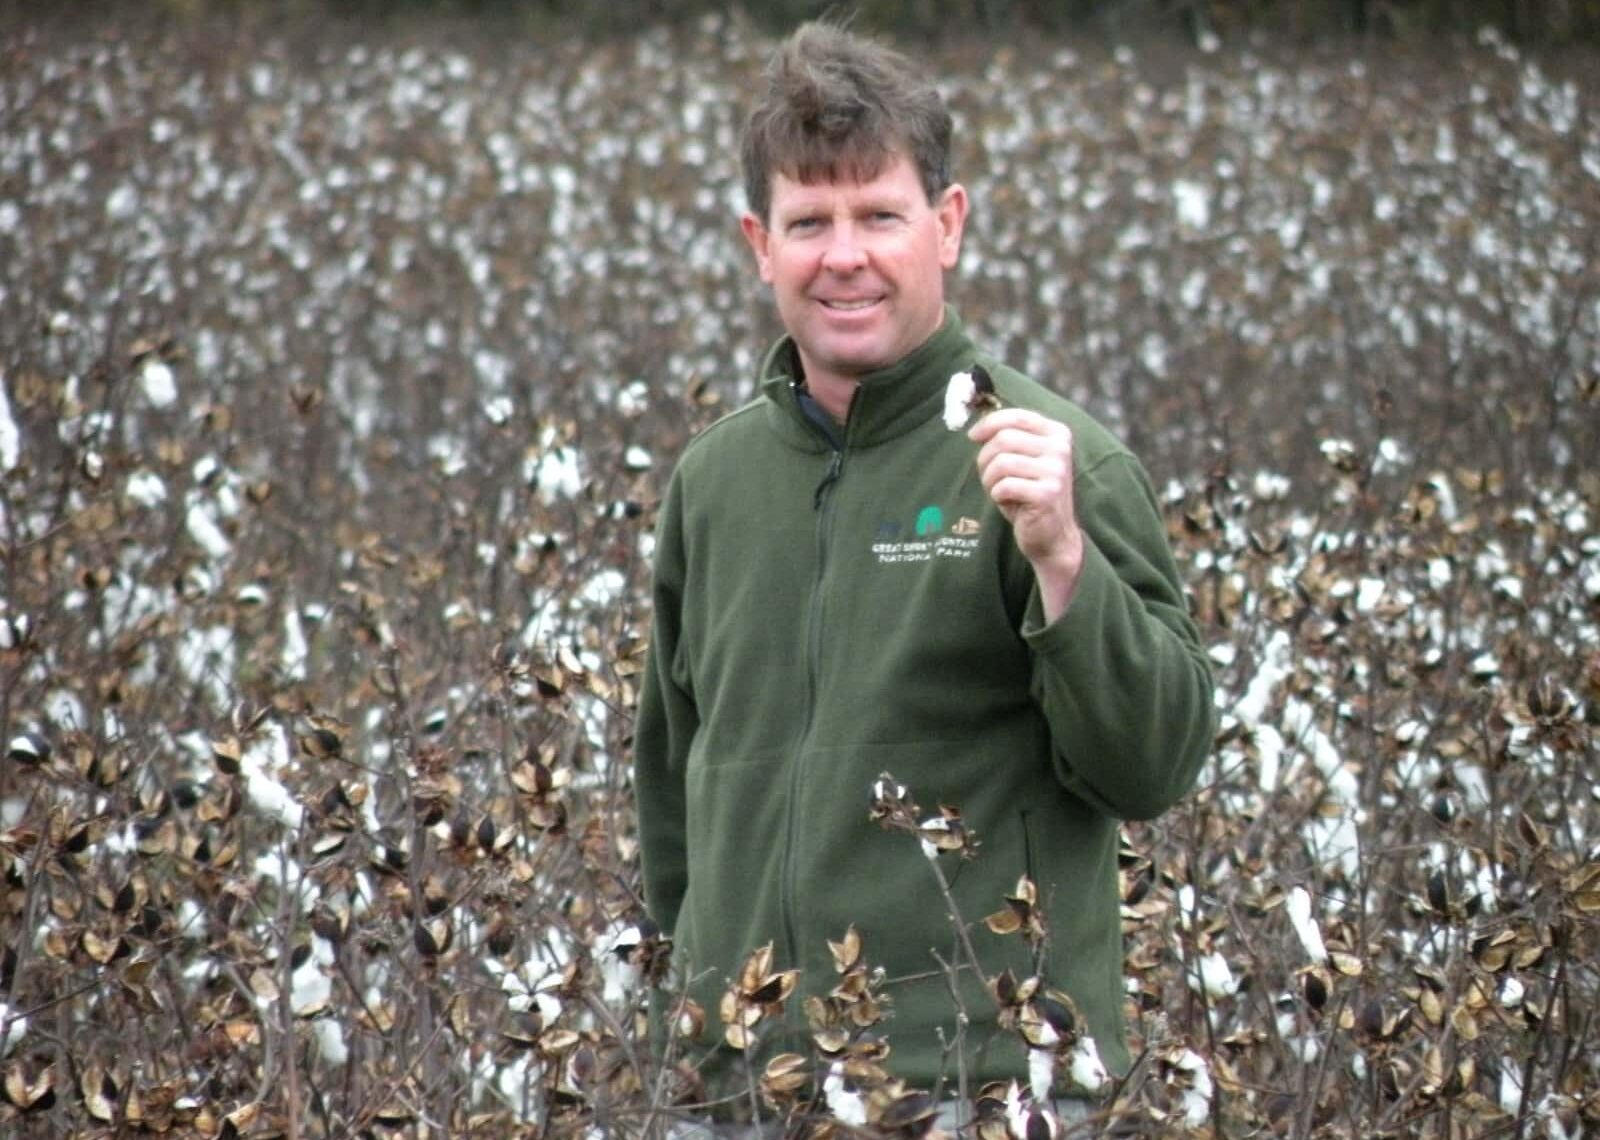 Man in green sweater standing in field with fuzzy flowers